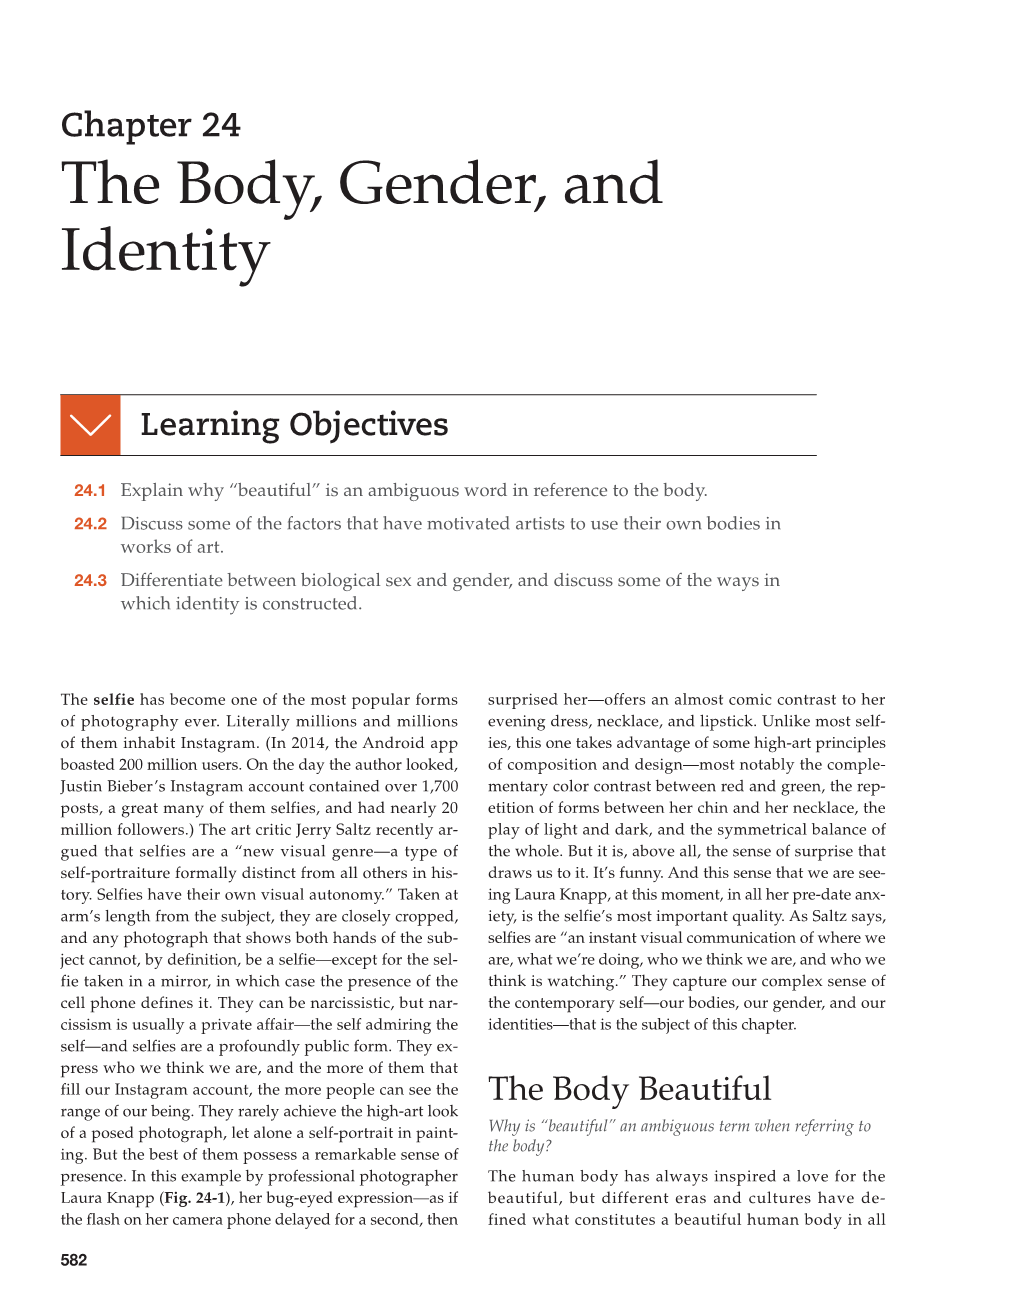 The Body, Gender, and Identity